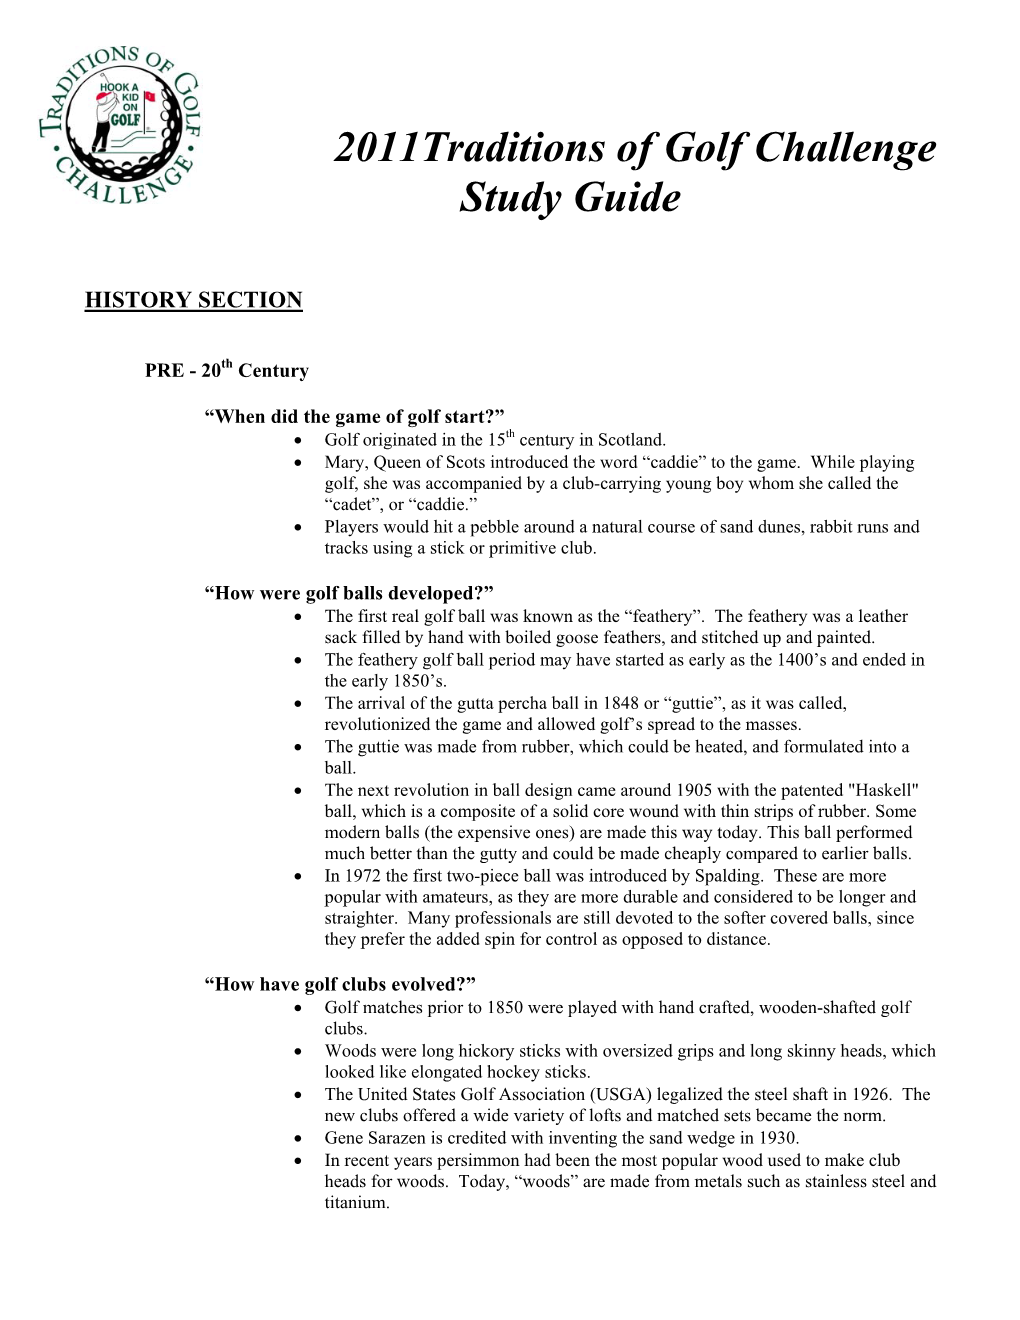 2011Traditions of Golf Challenge Study Guide